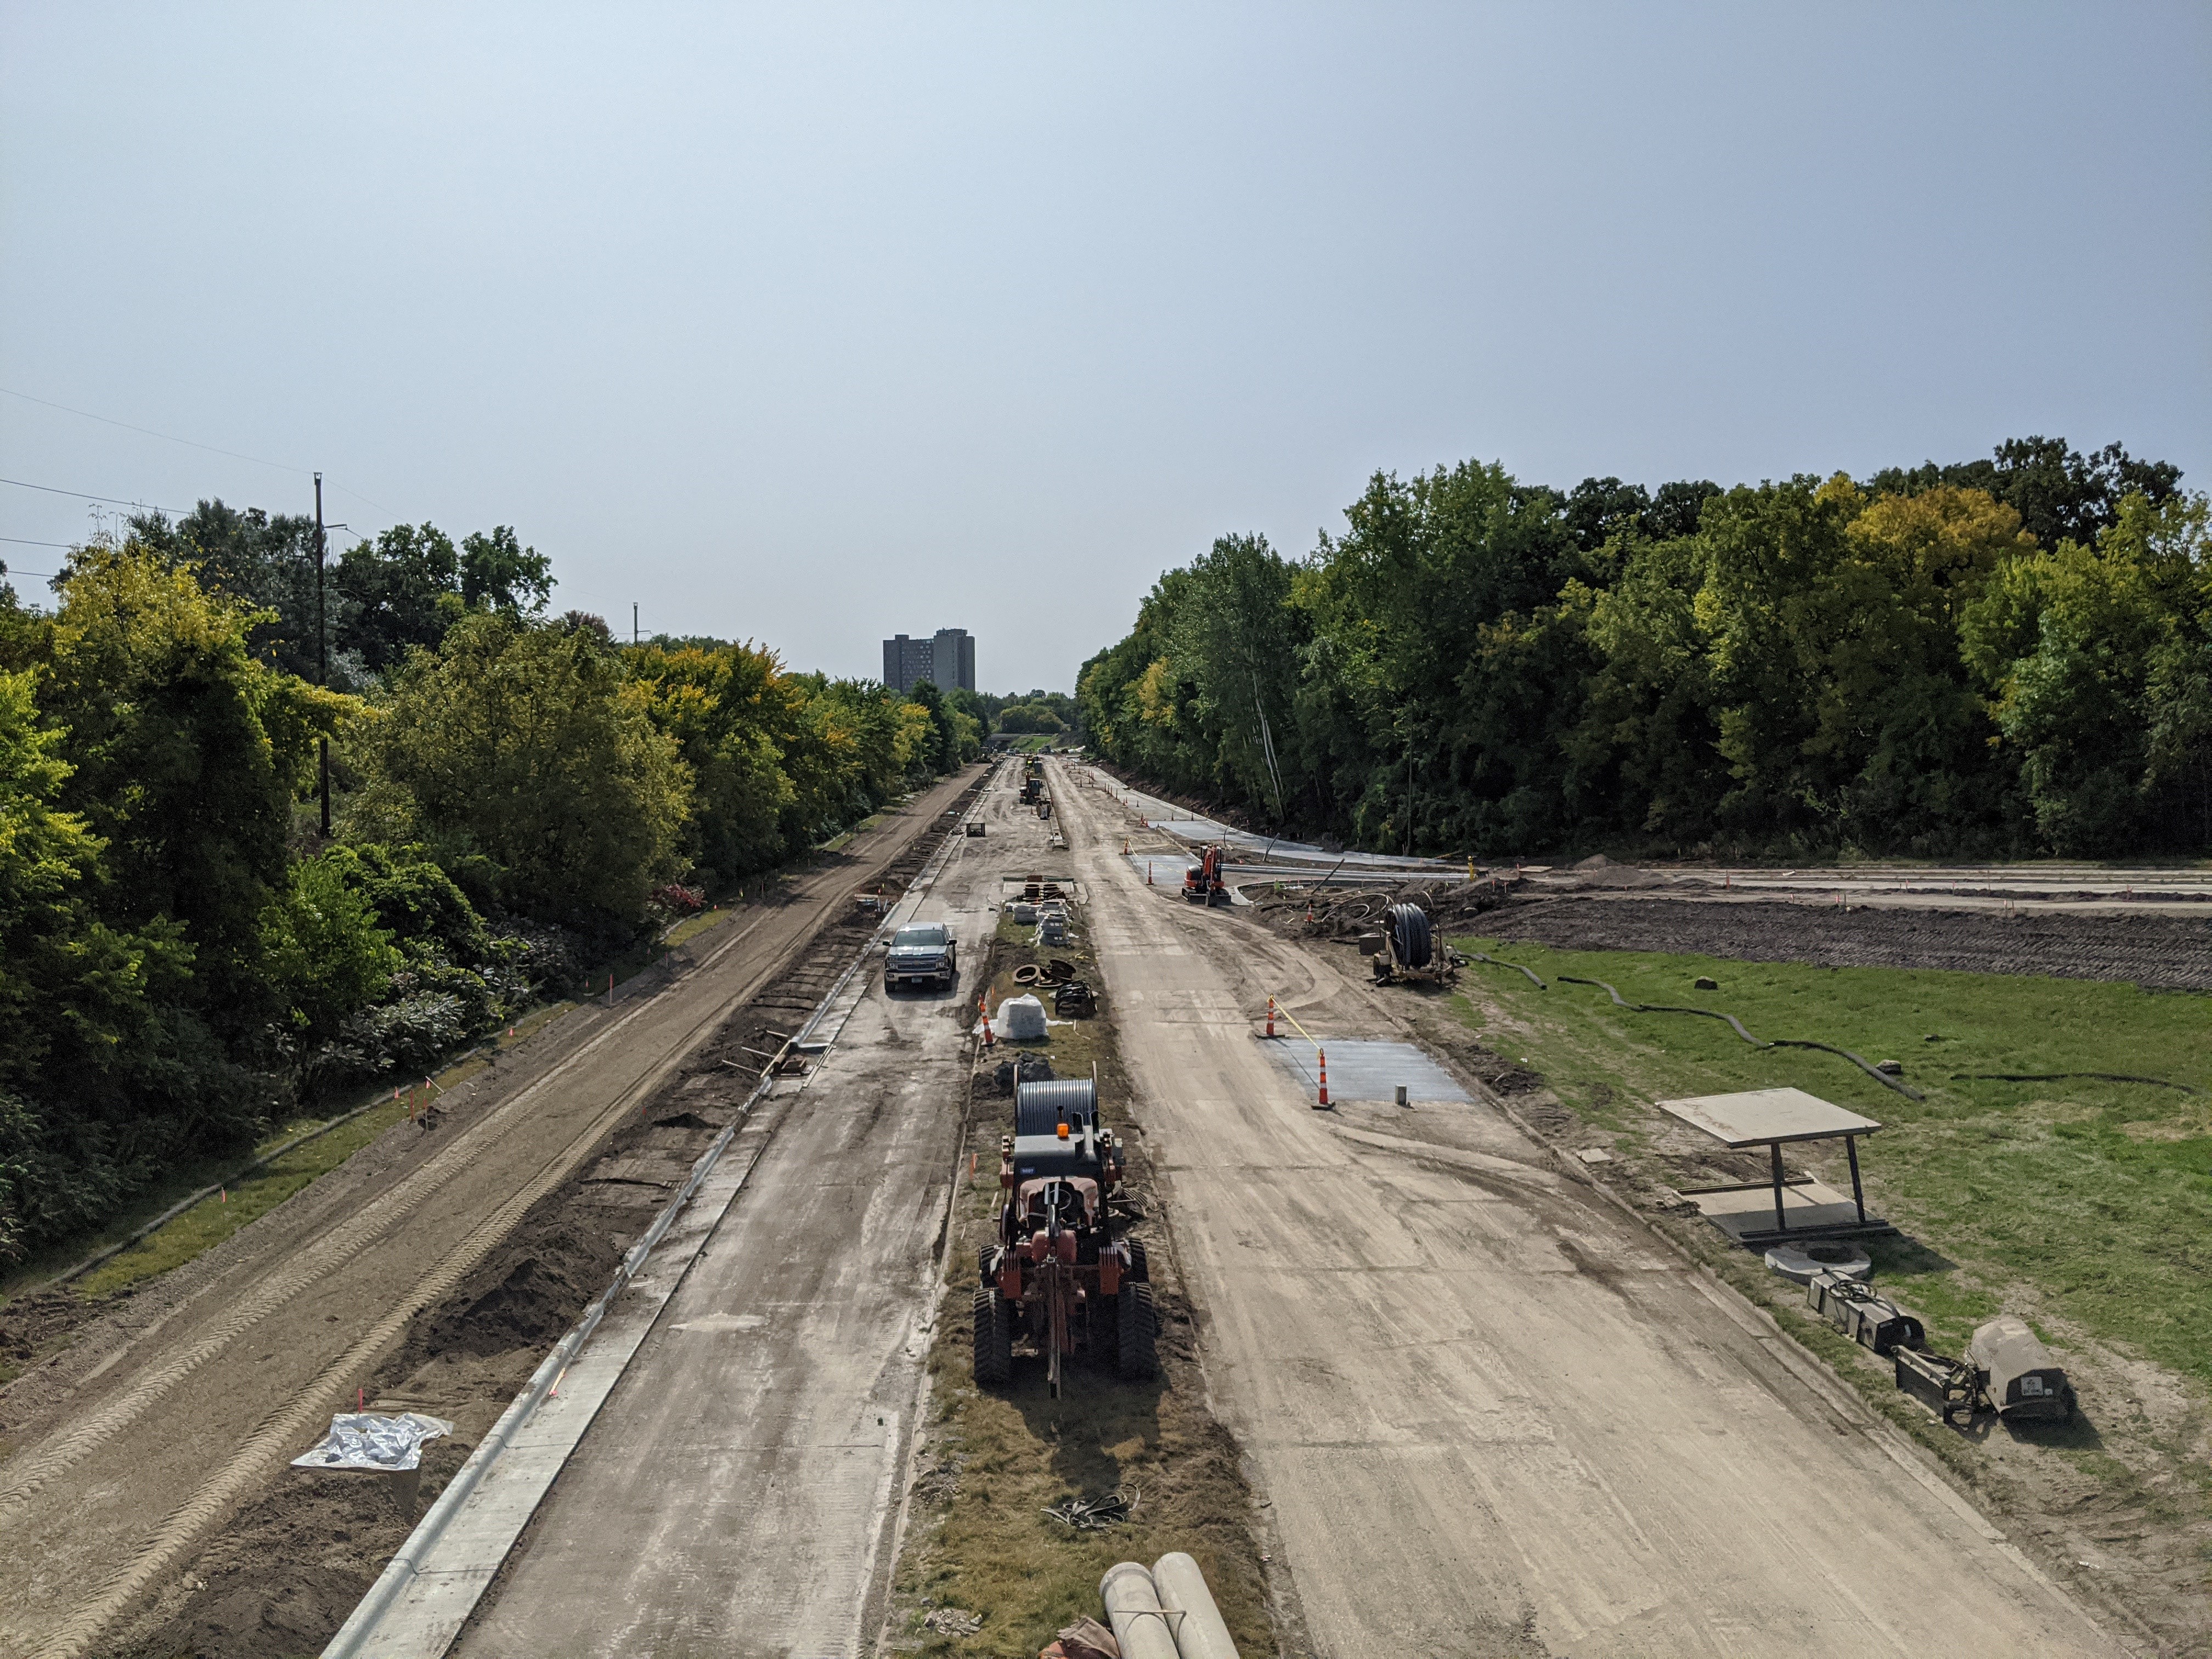 Construction photo of Ayd Mill Road from 9.18.20. Photo shows Ayd Mill Road from the southbound view taken from Grand overpass.